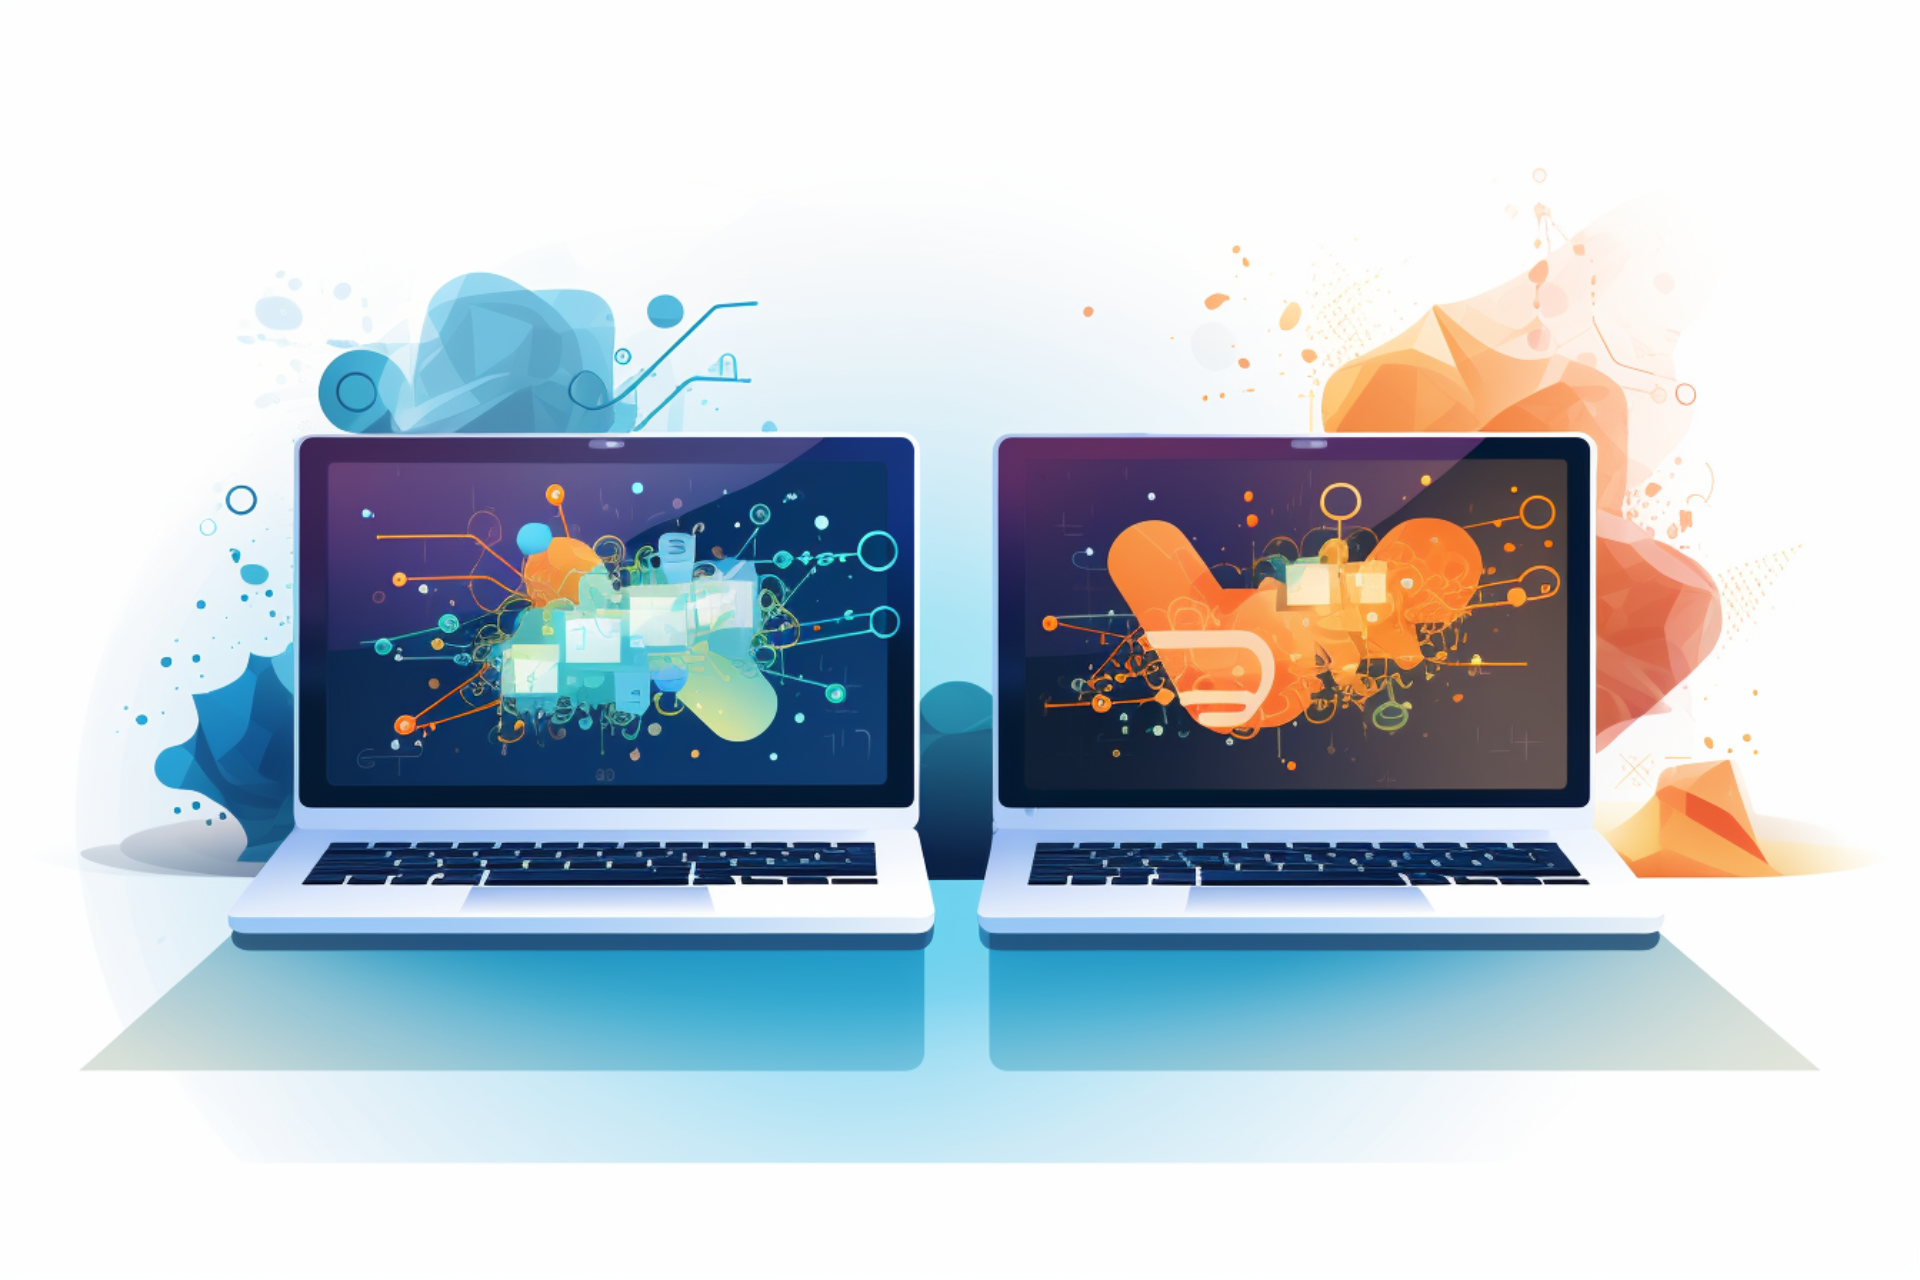 Two laptops displaying software interfaces overlaid with vibrant splashes of color, illustrated in an ethereal style with light blue and orange hues, featuring precisionist lines and shapes. The imagery evokes a cloudcore aesthetic with a touch of historical illustration, symbolizing intertwined networks.